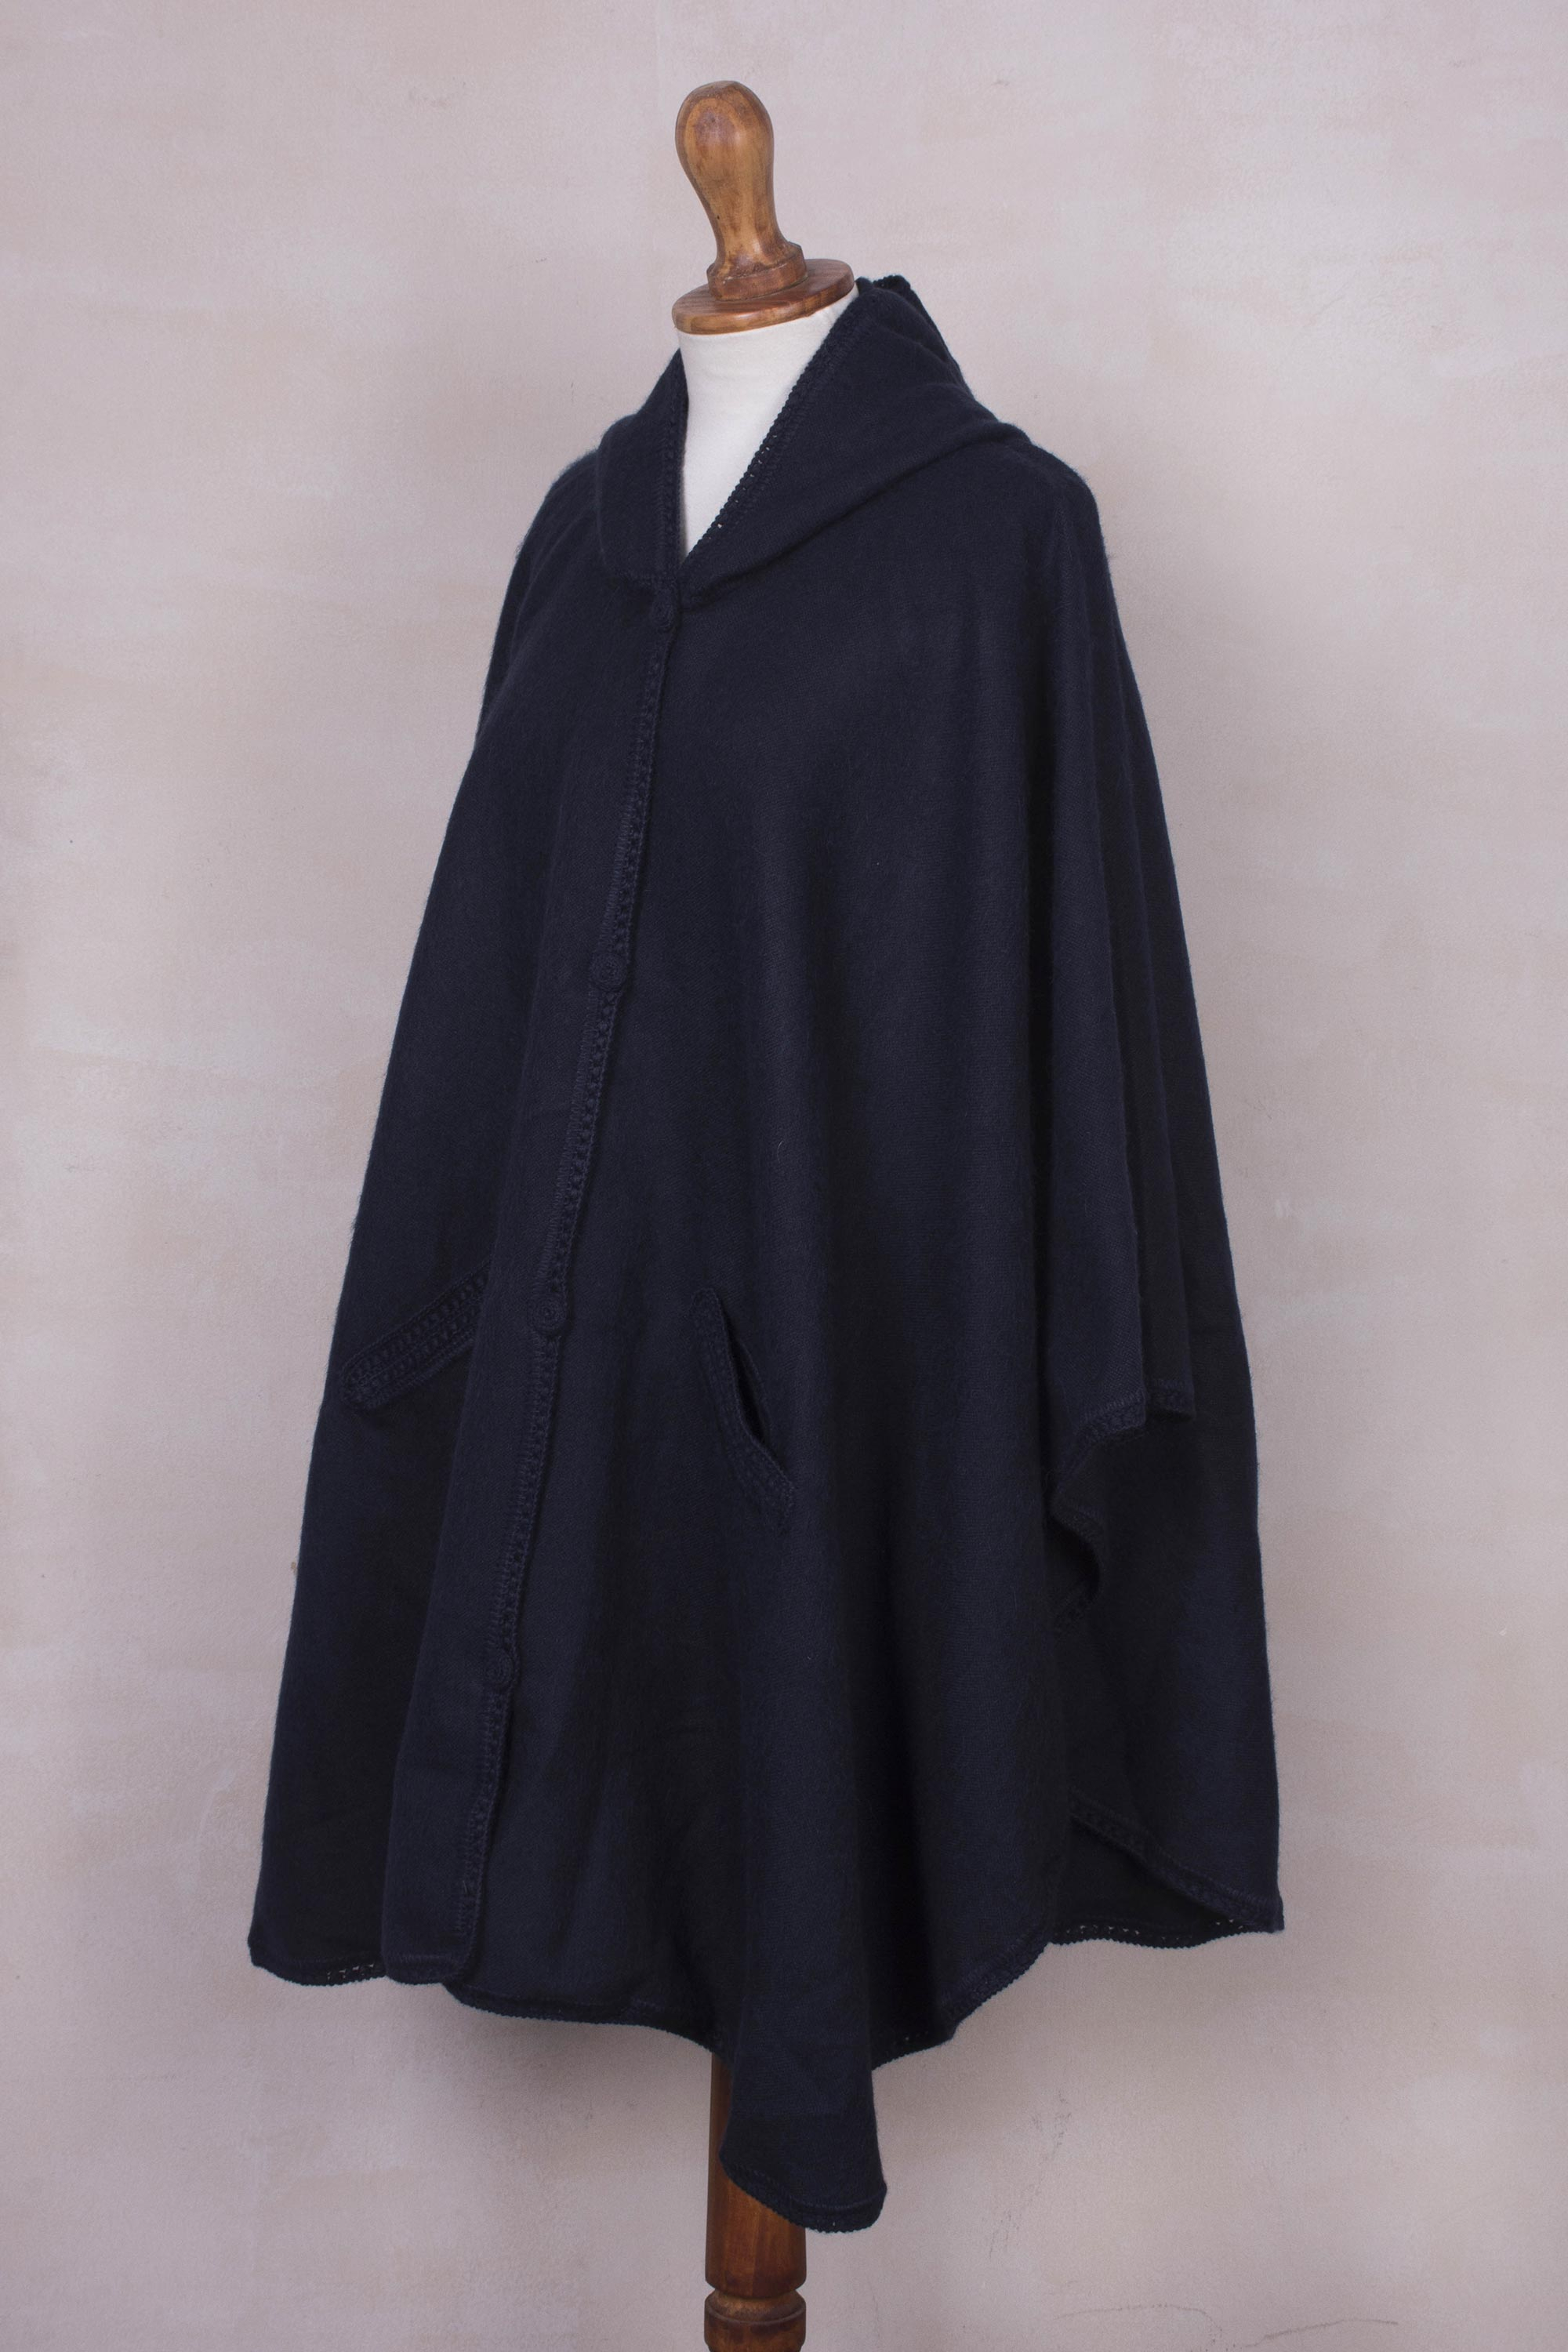 Hooded Woven Navy Alpaca Blend Cape - Vision in Navy | NOVICA